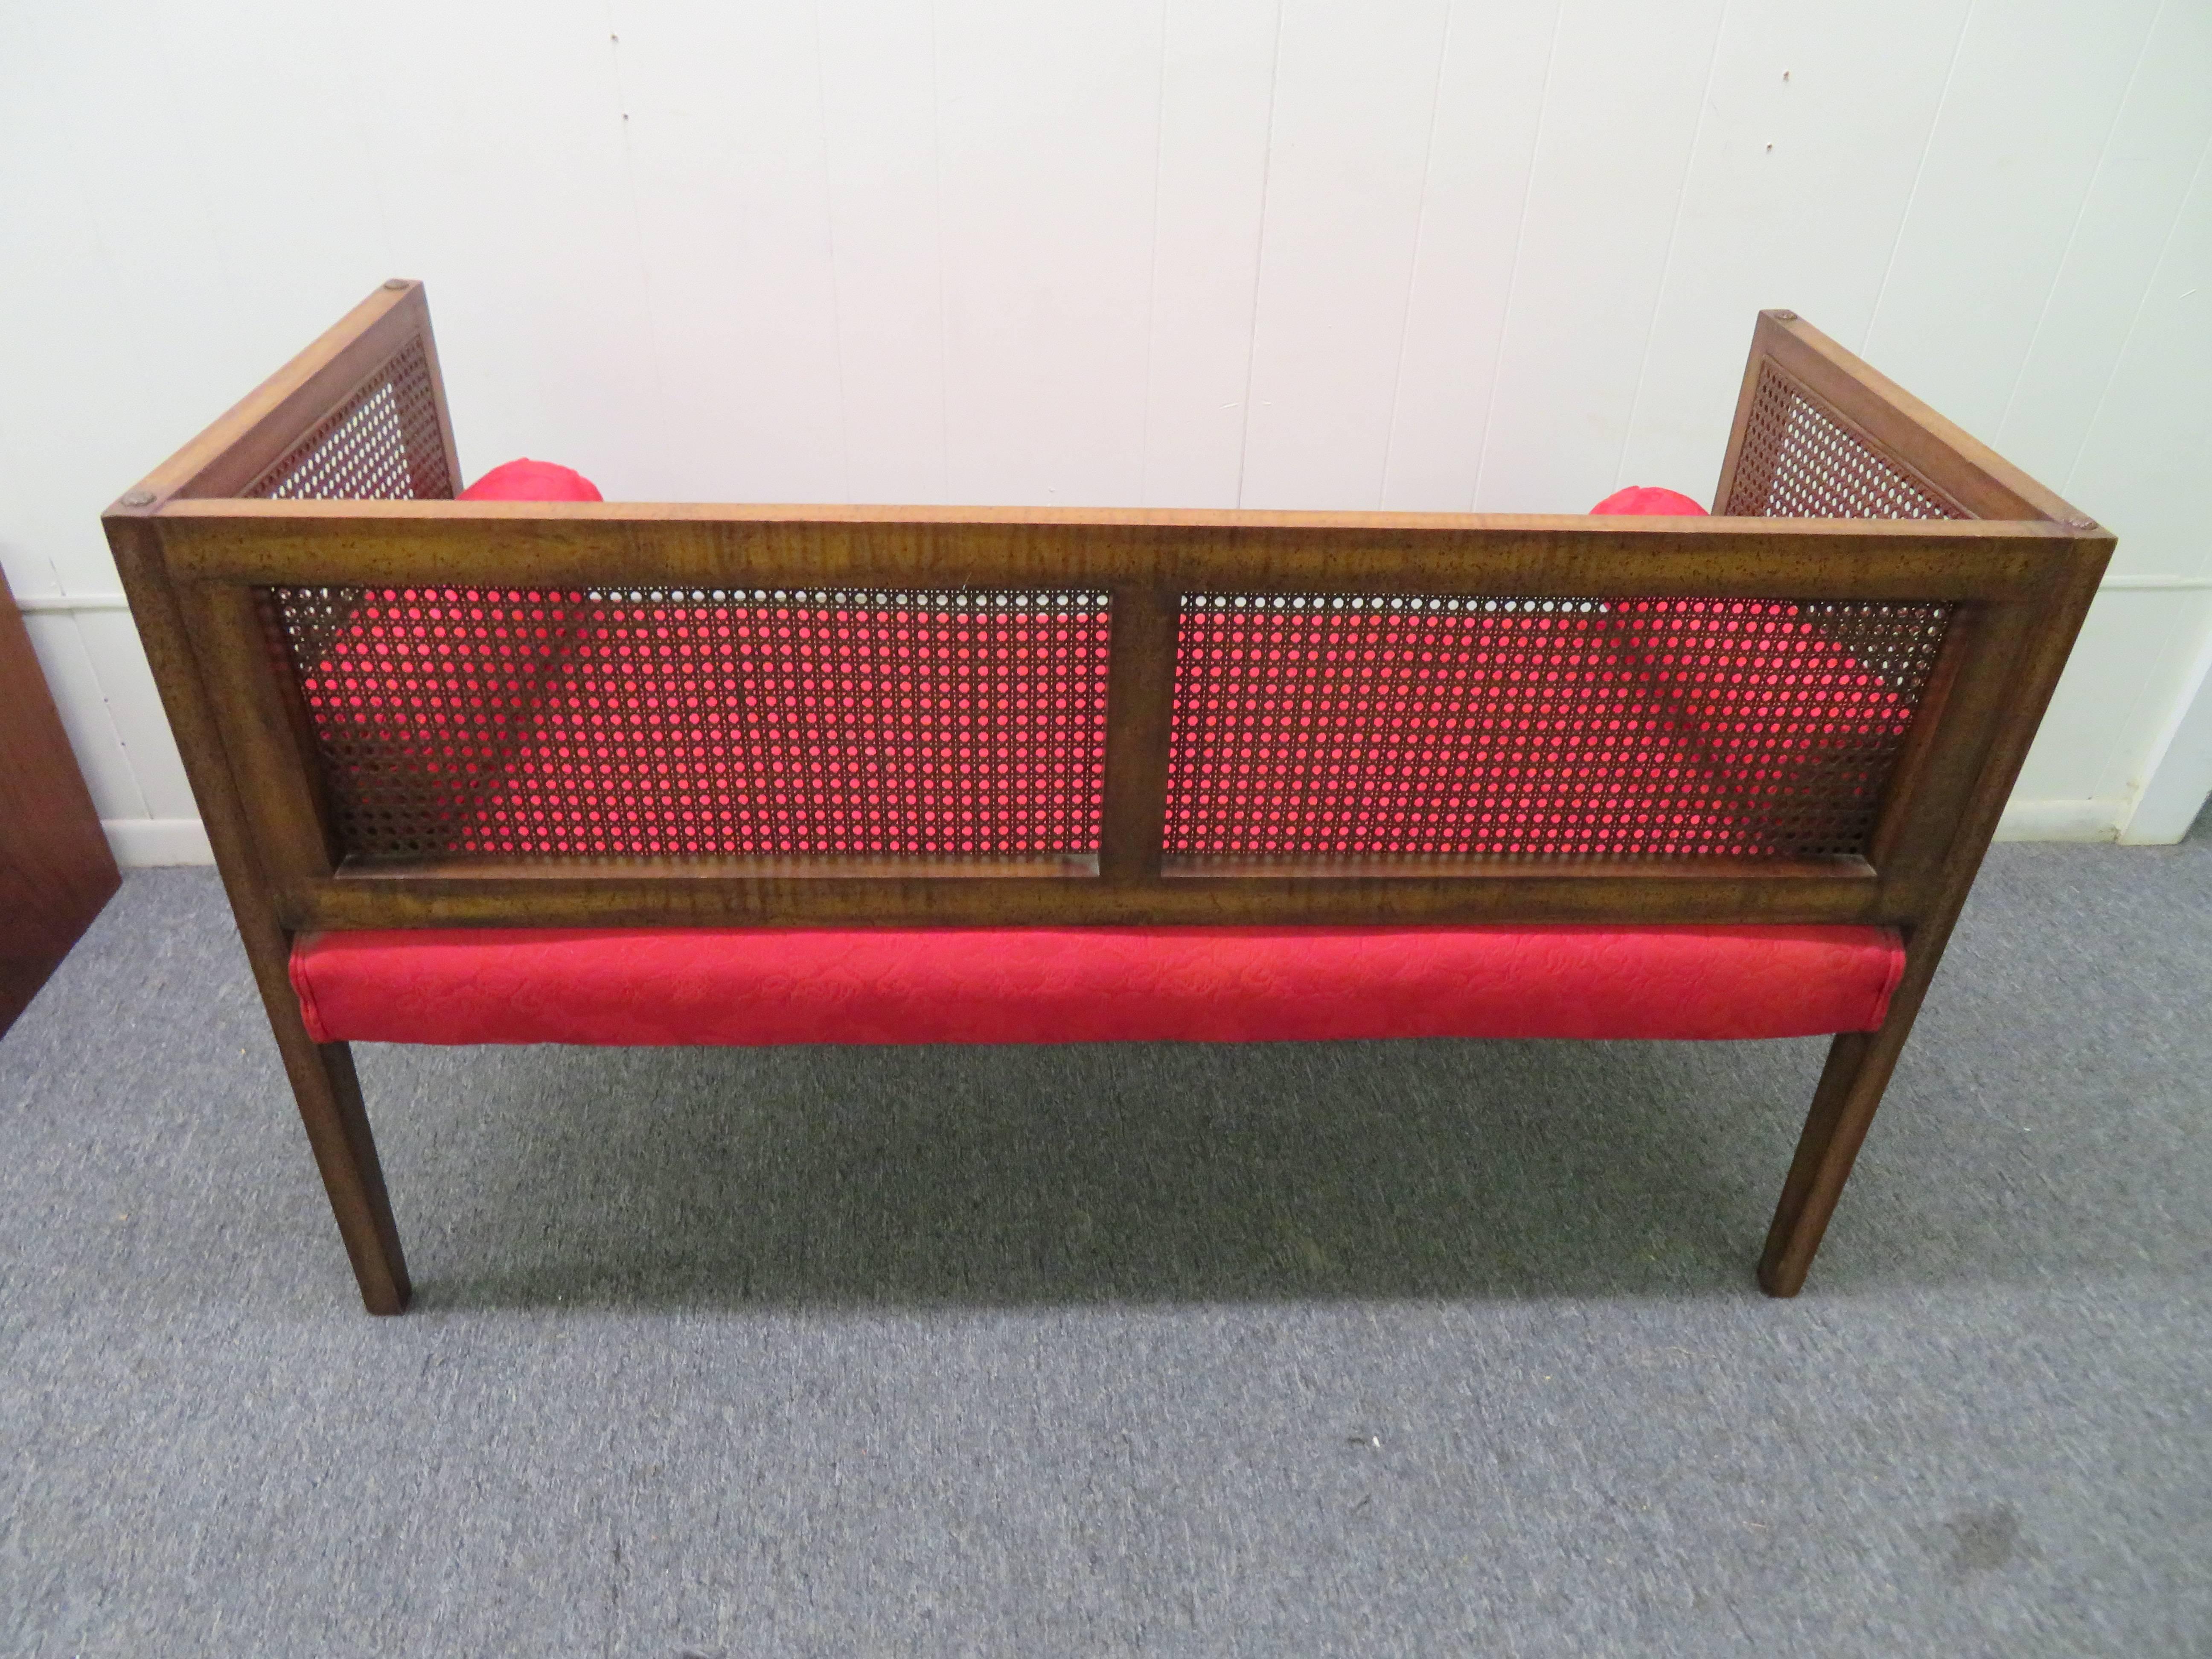 Upholstery Gorgeous Hollywood Regency Boxy Caned Bench Mid-Century Modern